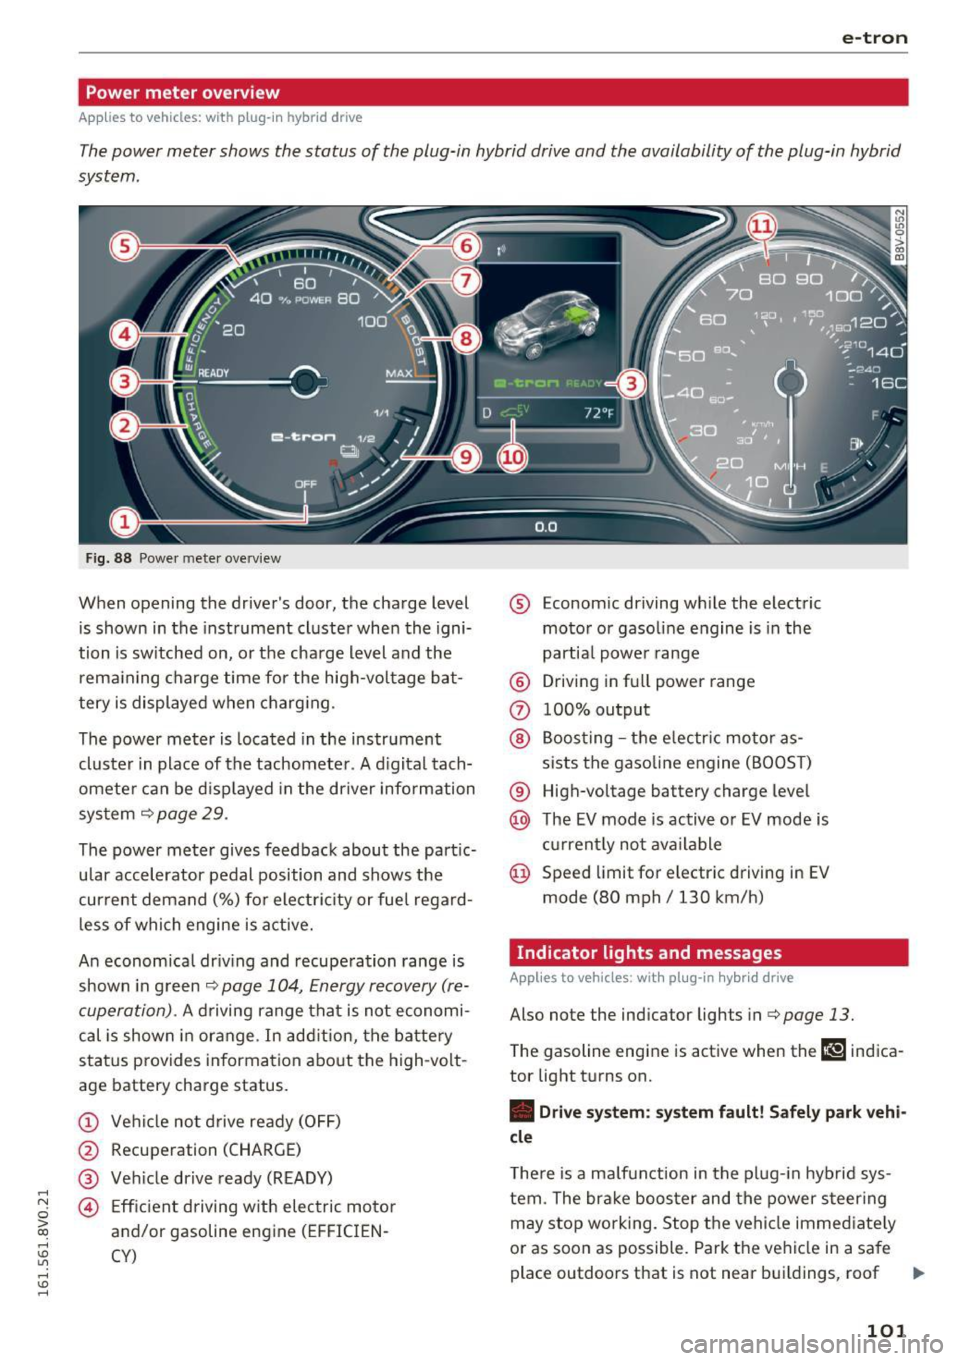 AUDI A3 2016  Owner´s Manual .... N 
0 > CX) 
.... I.Cl U"I 
.... I.Cl .... 
e-tron 
Power  meter  overview 
Applies to vehicles: with  plug-in hybrid drive 
The power  meter  shows  the  status  of  the  plug-in  hybrid drive an